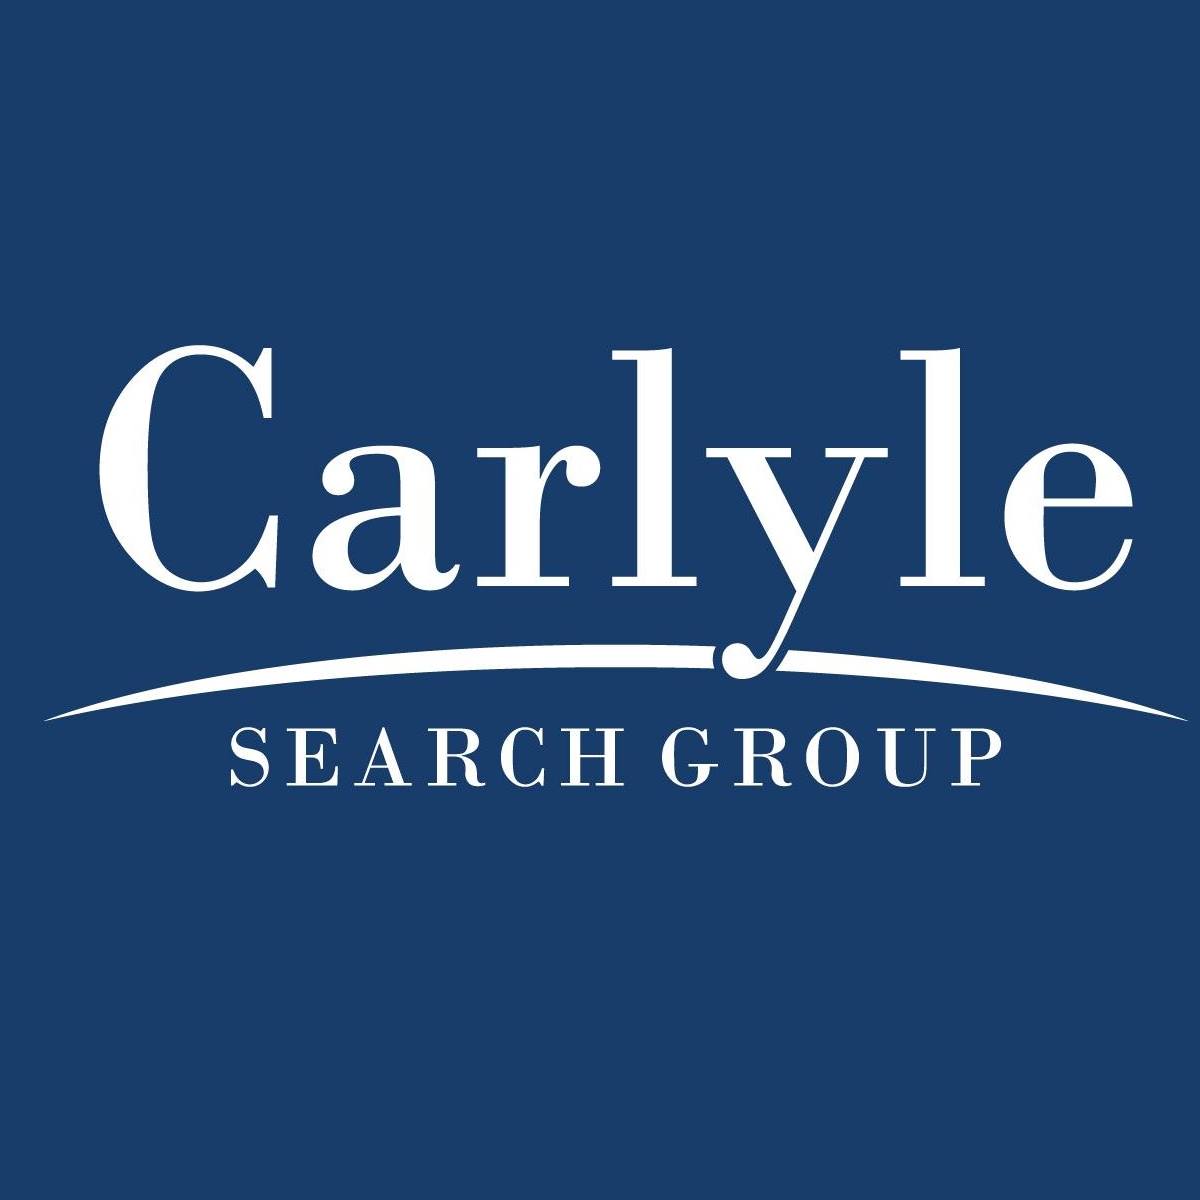 Carlyle Search Group